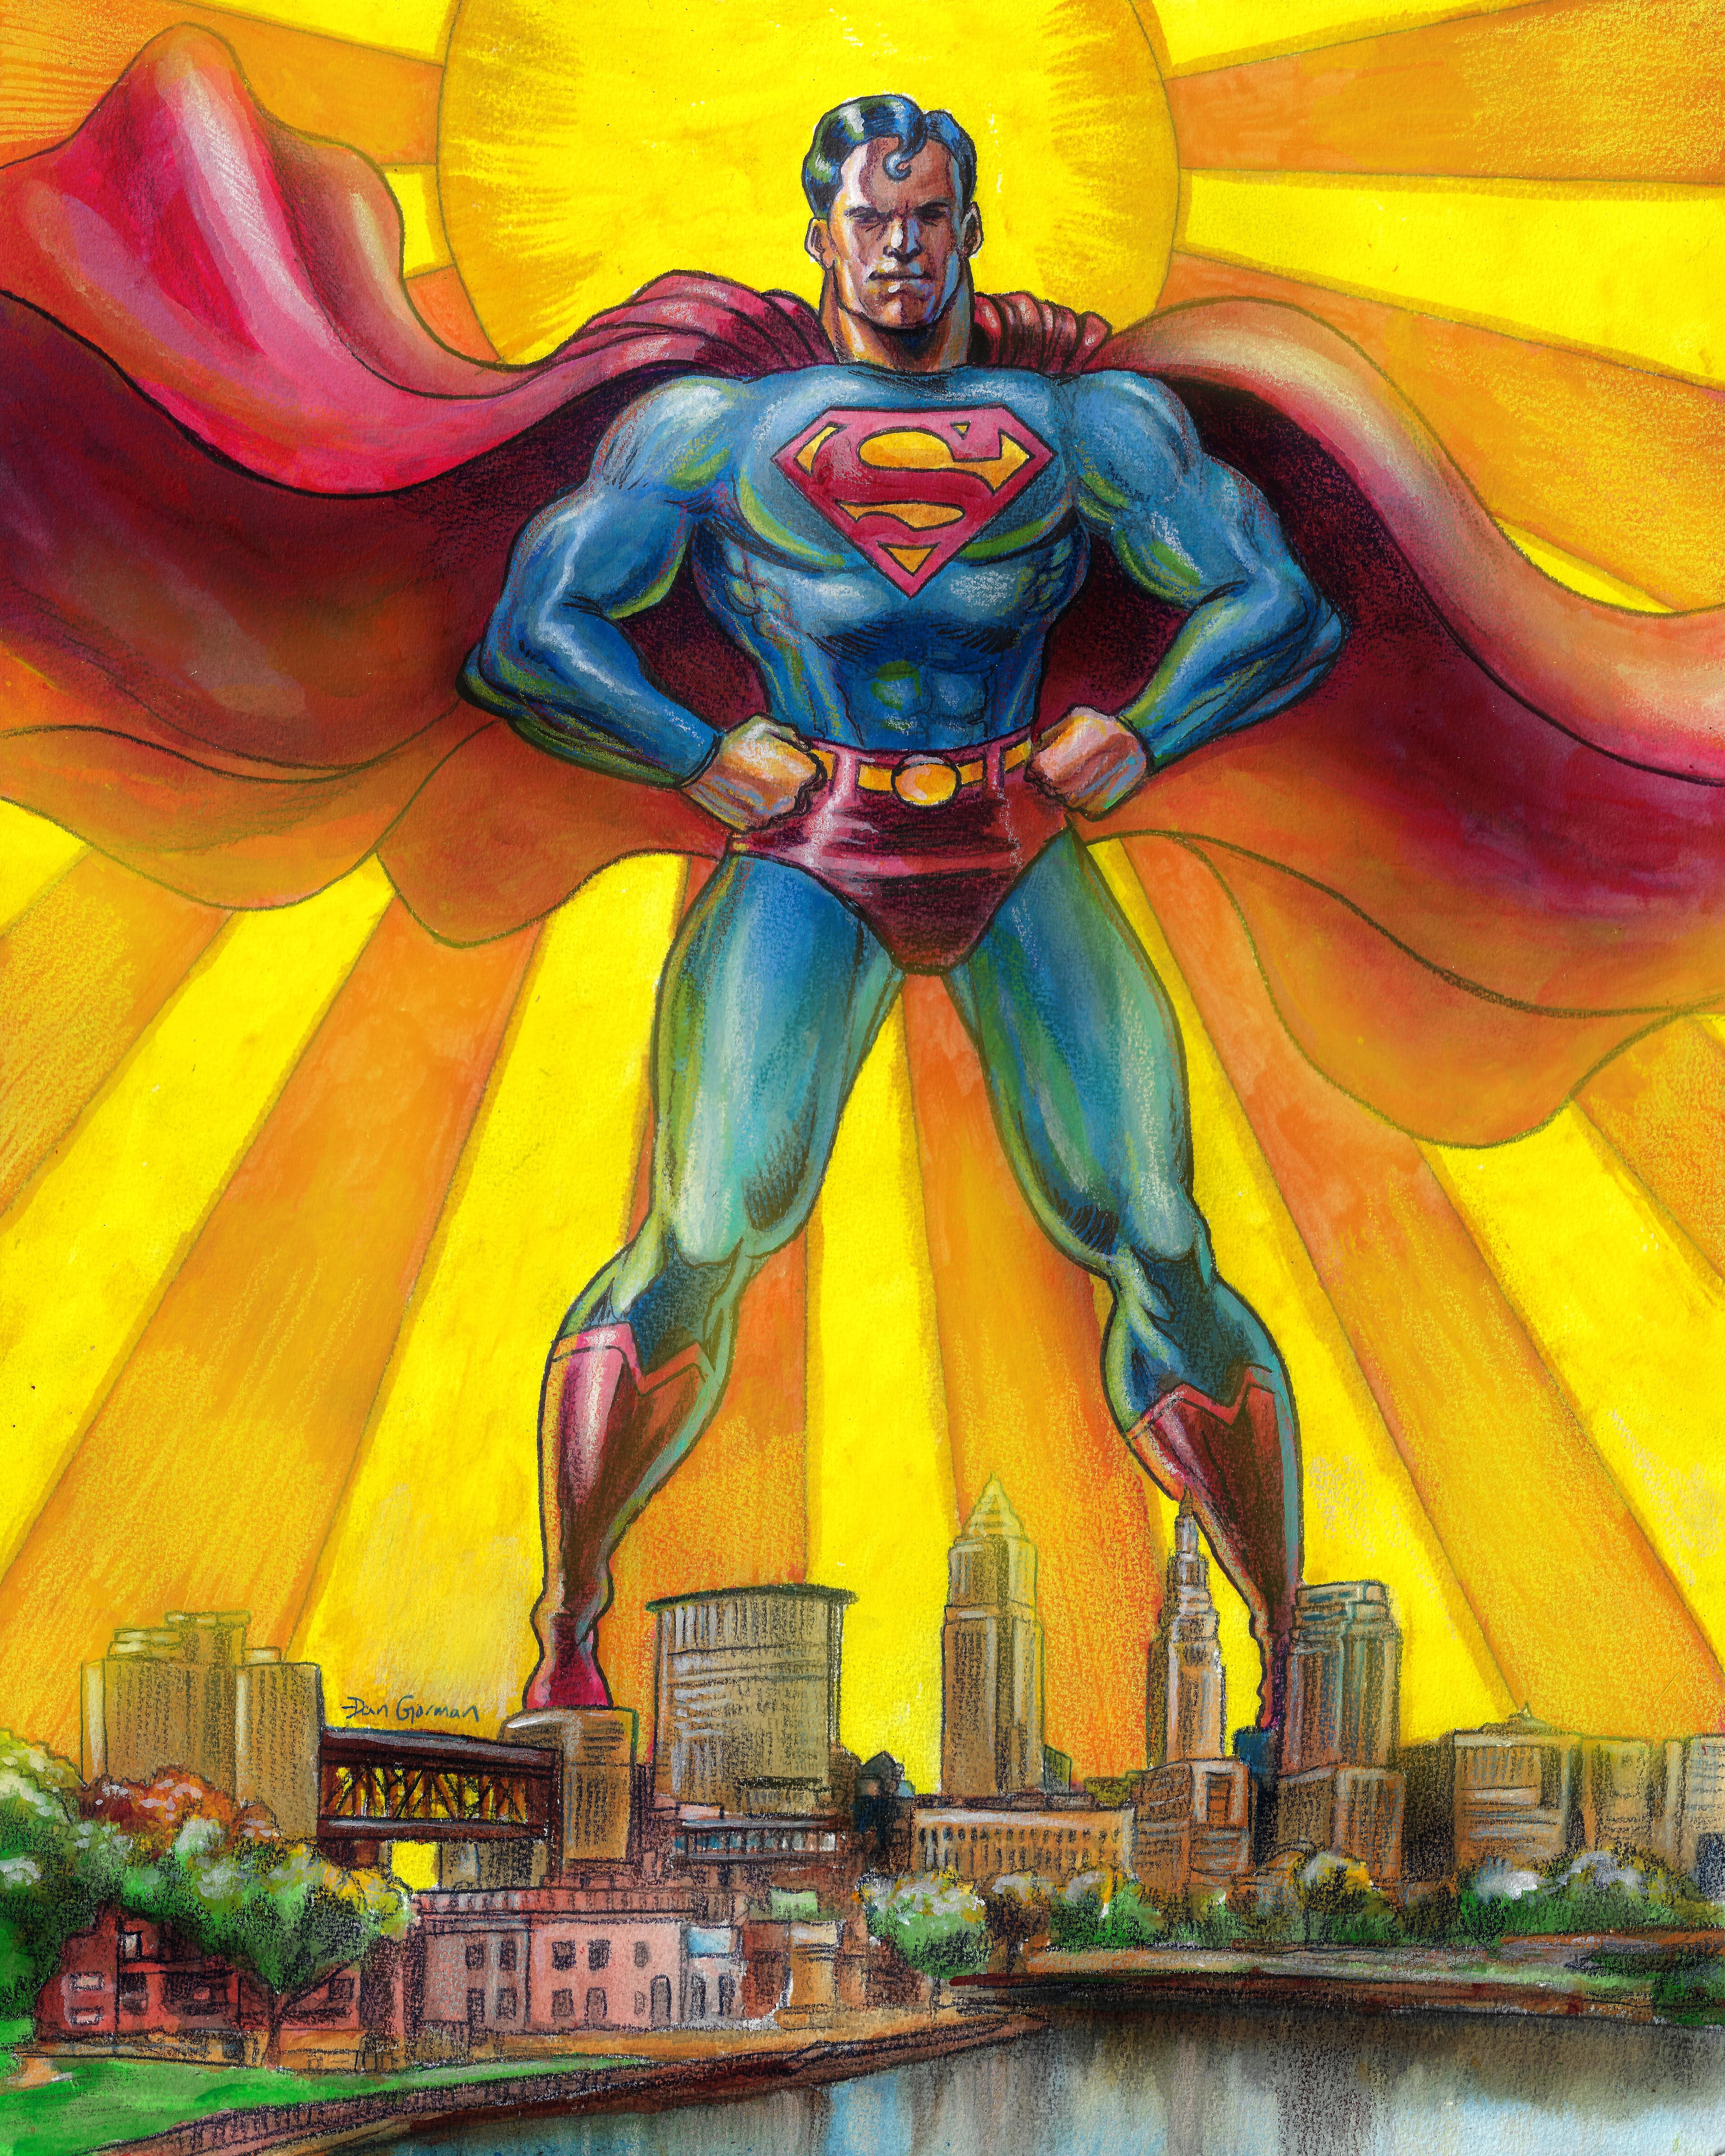 Illustration of Superman standing behind the city of Cleveland with the Sun and rays shining behind him